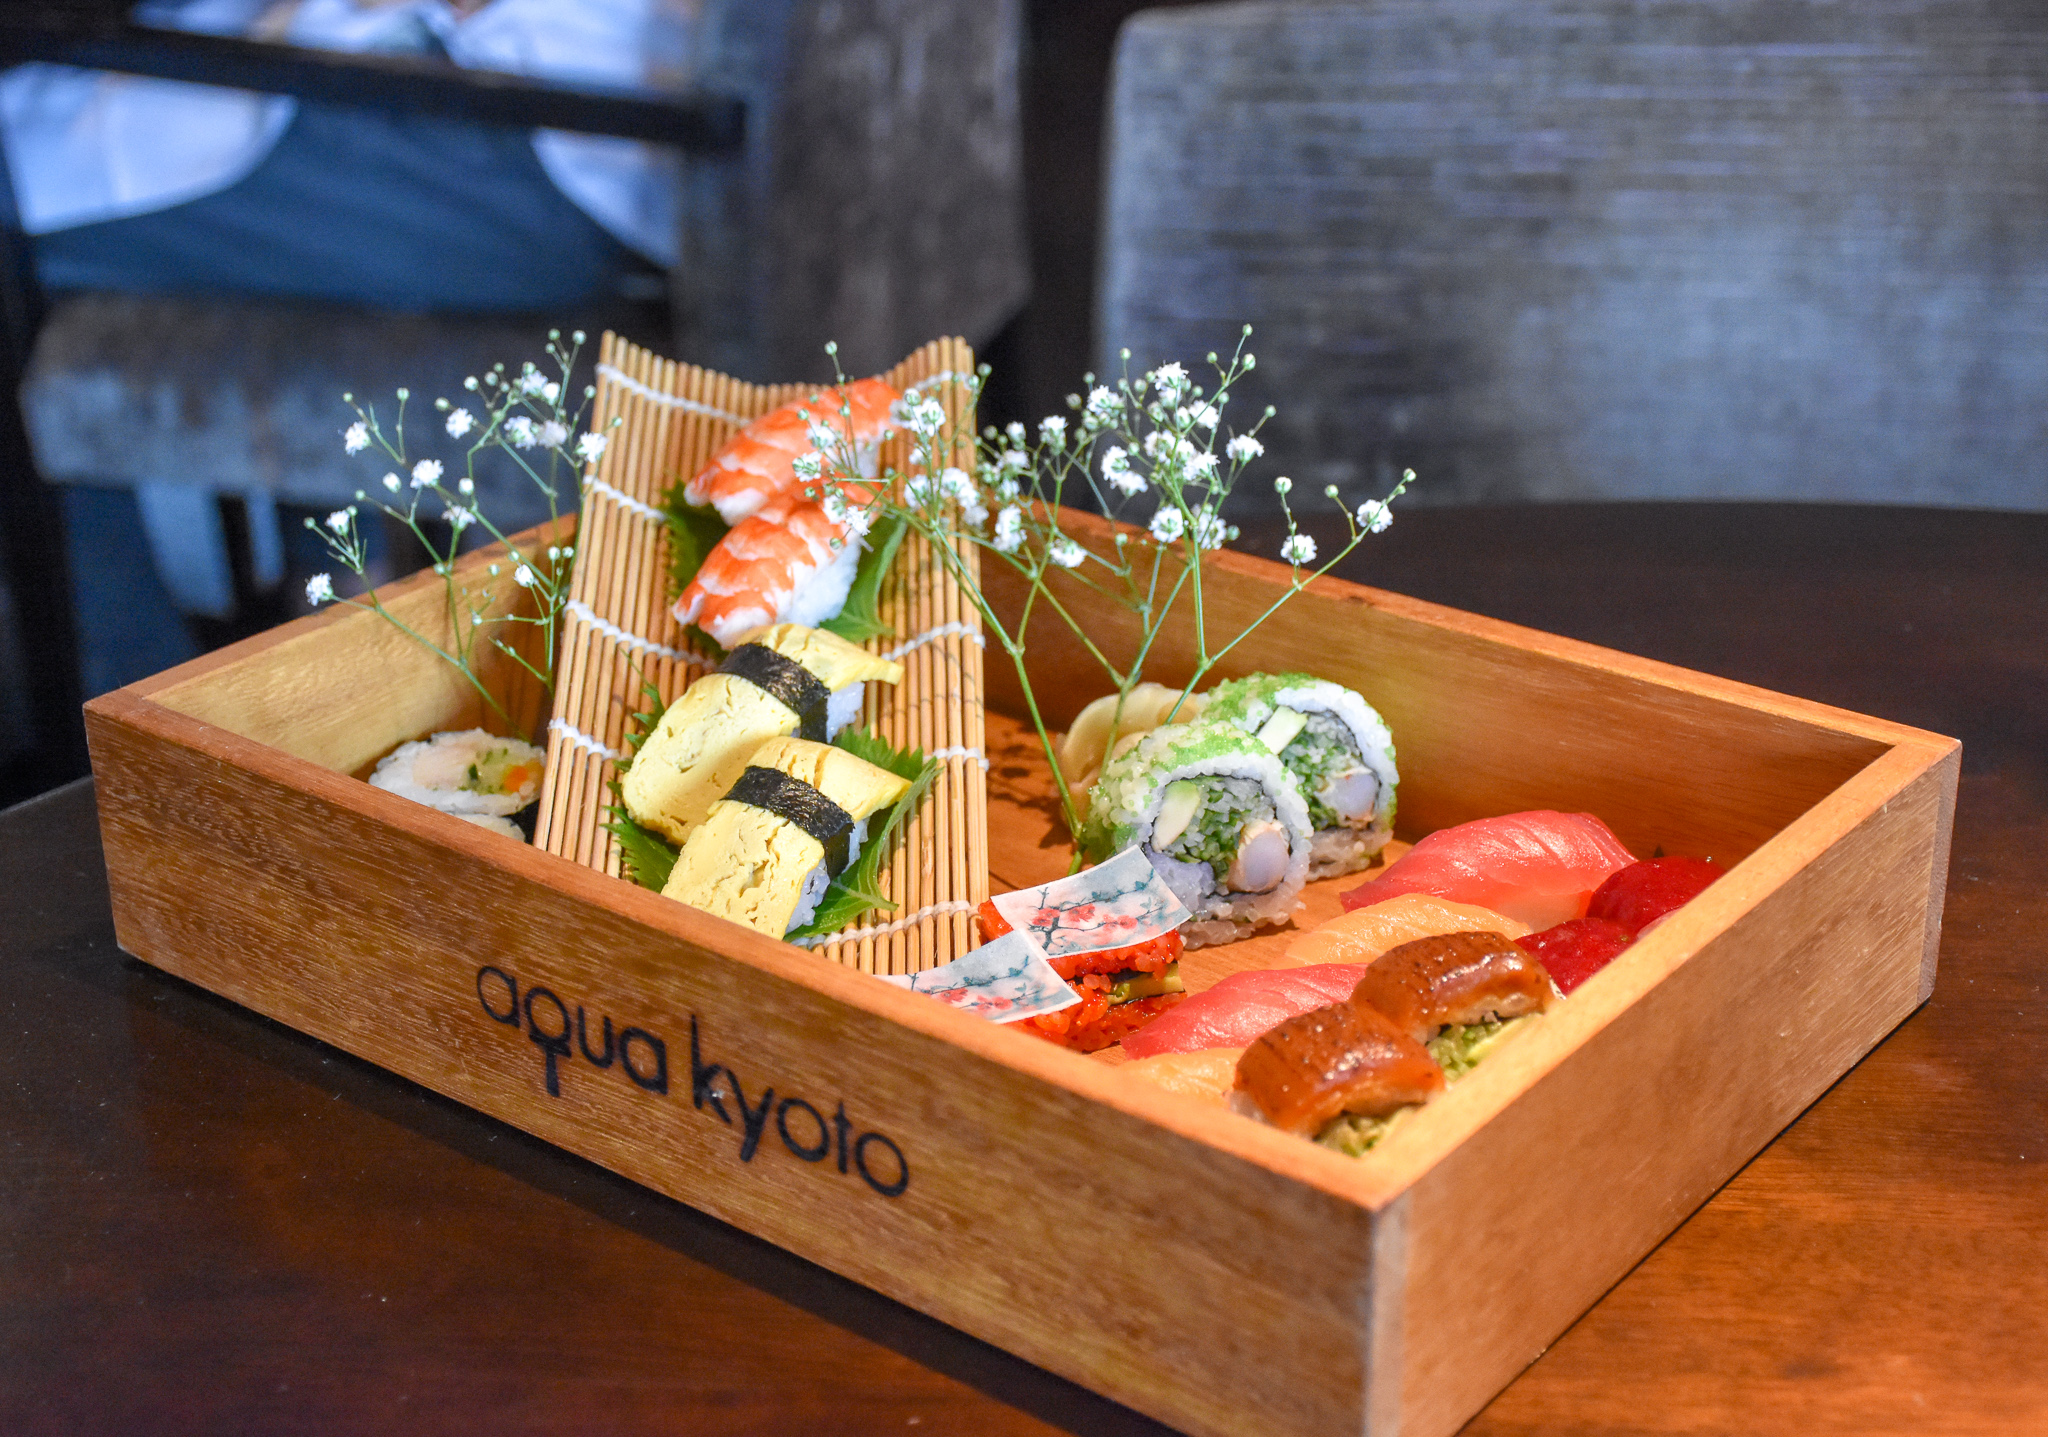 Ukiyo Weekend Brunch Review: Bottomless Champagne and Delicious Sushi at Aqua Kyoto